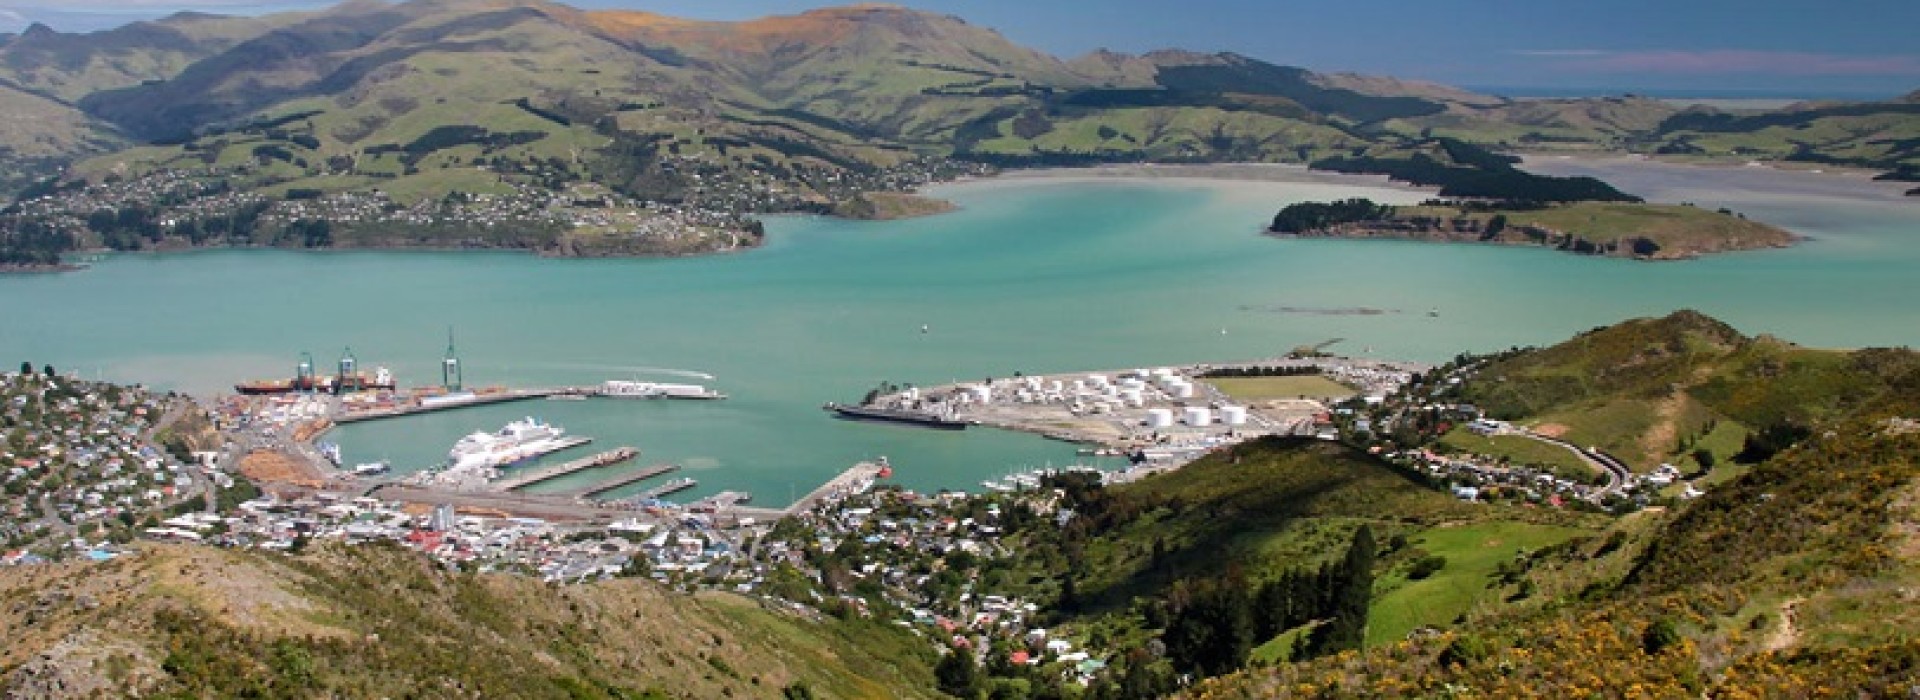 Governor's Bay, Diamond Harbour and Lyttelton Waste Water Project Awarded